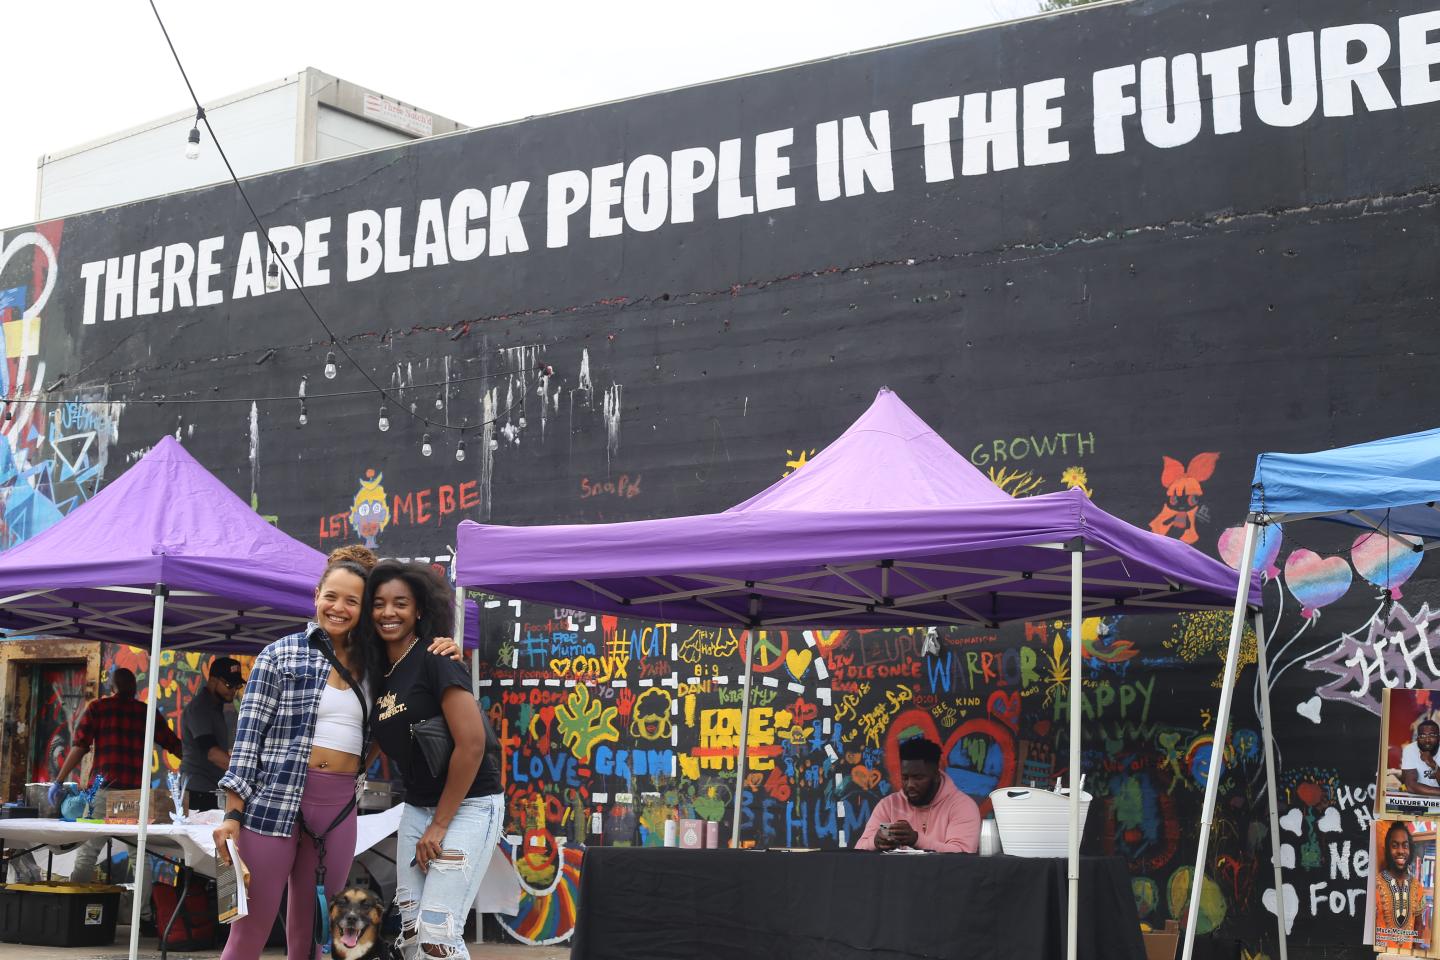 Two people near purple tents with a mural in the background that says "There are Black People in the Future"